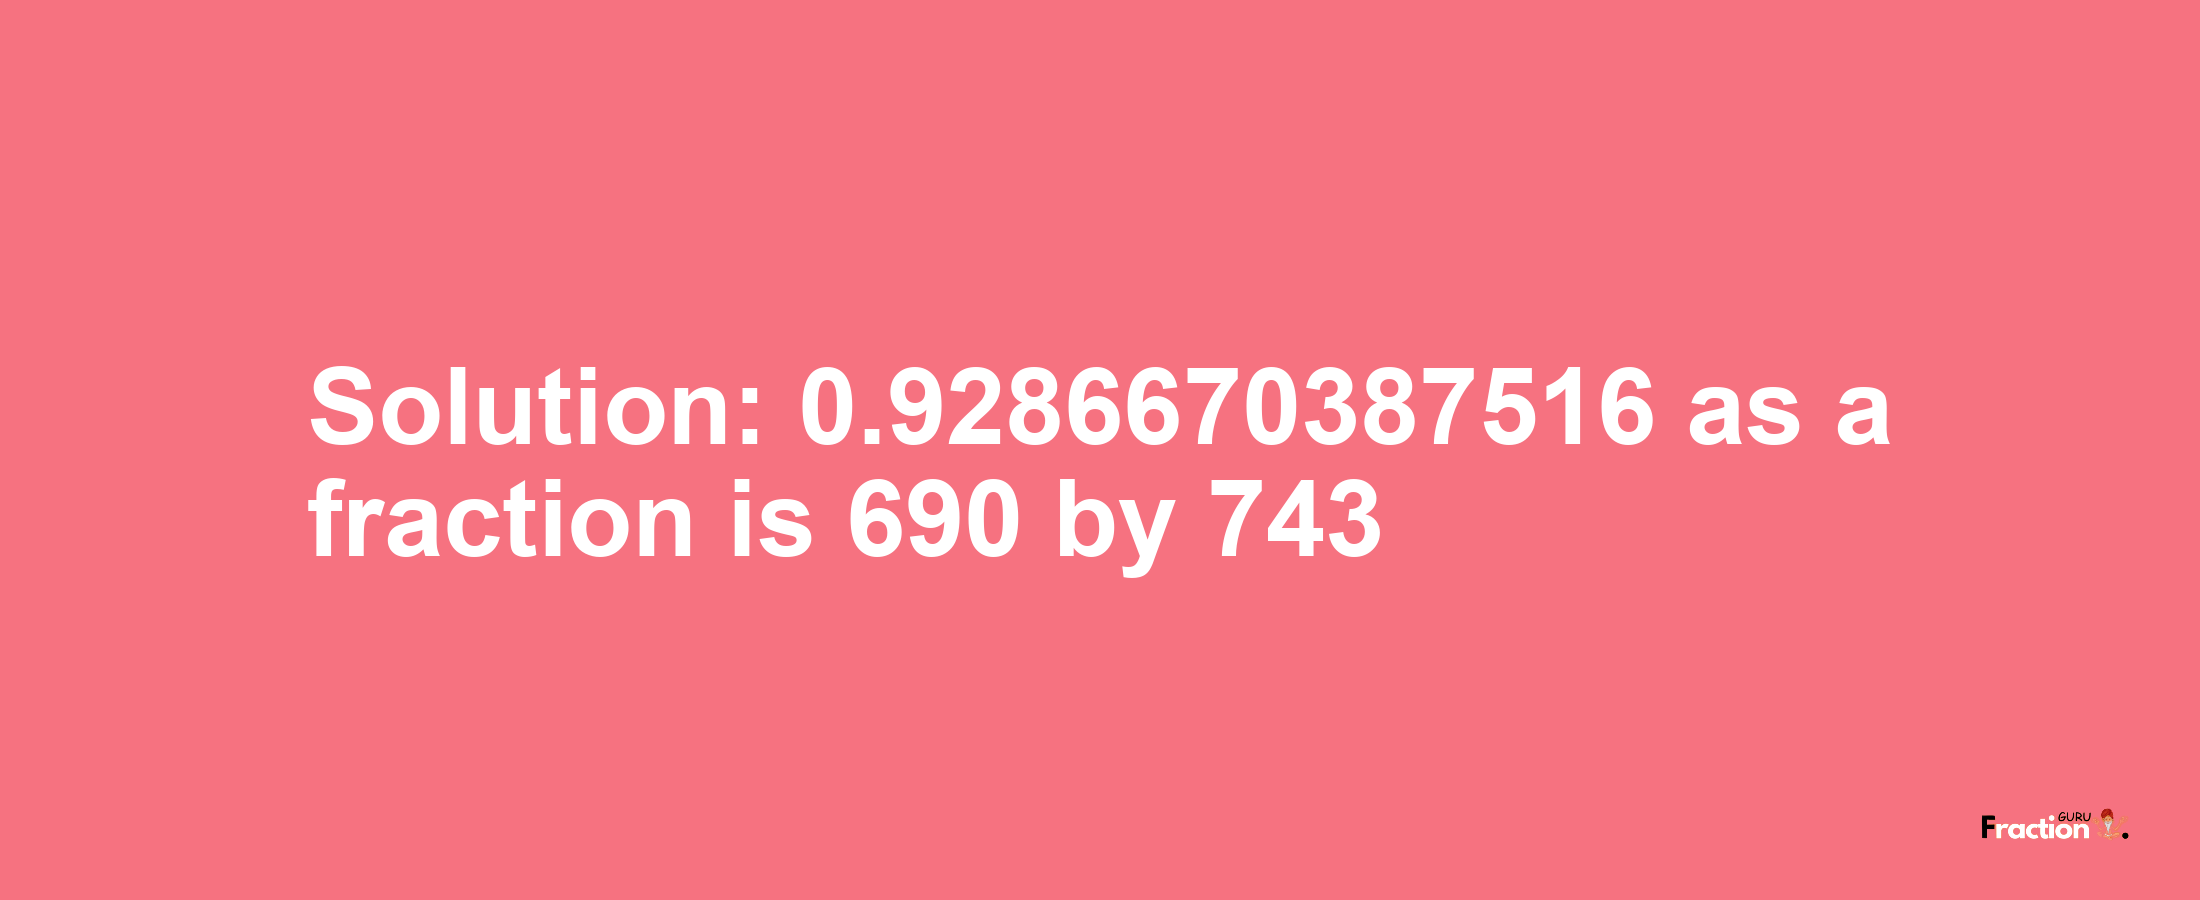 Solution:0.9286670387516 as a fraction is 690/743